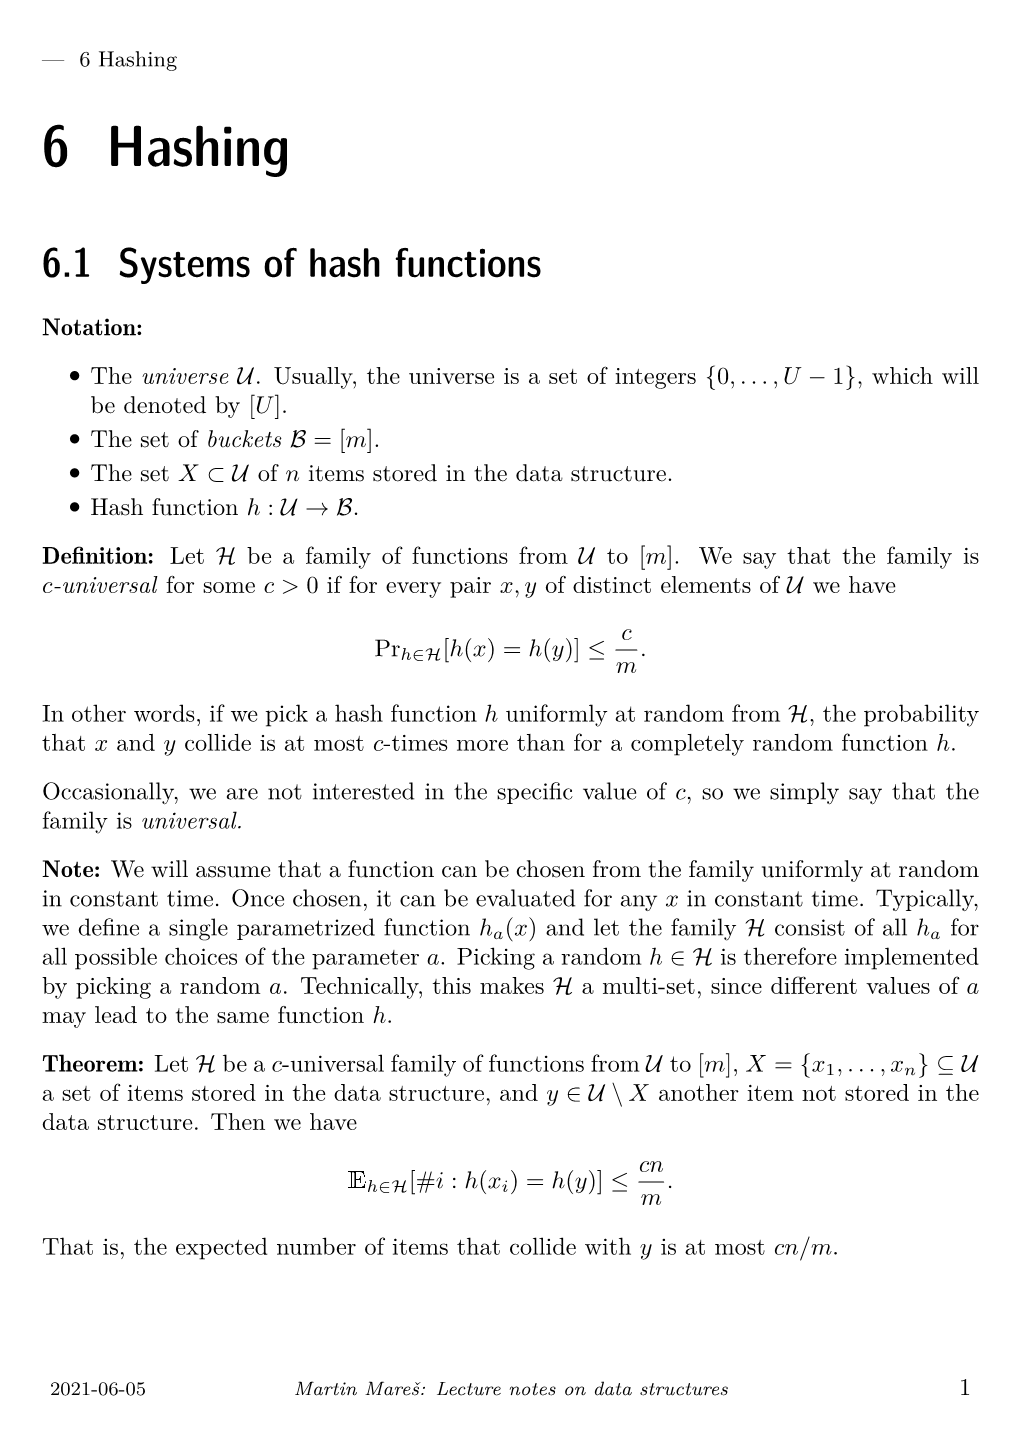 6.1 Systems of Hash Functions